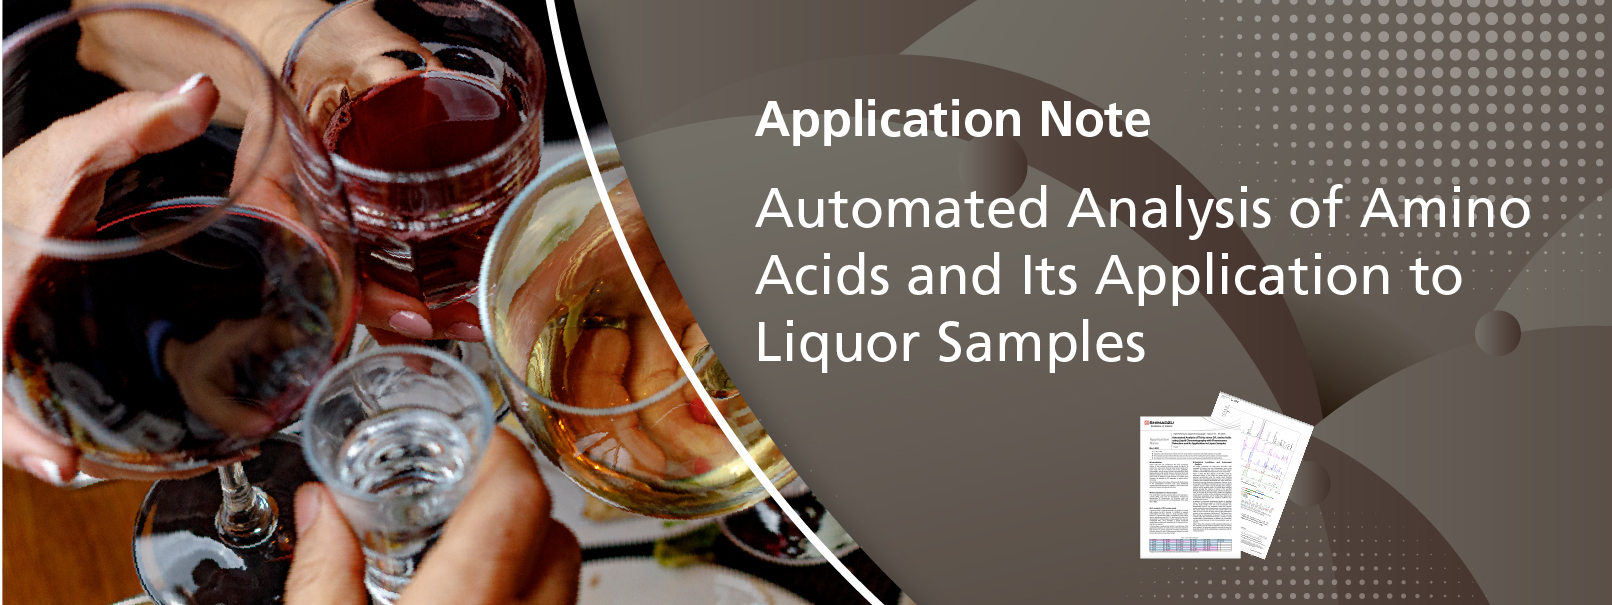 Automated Analysis of Amino Acids and its Application to Liquor Samples